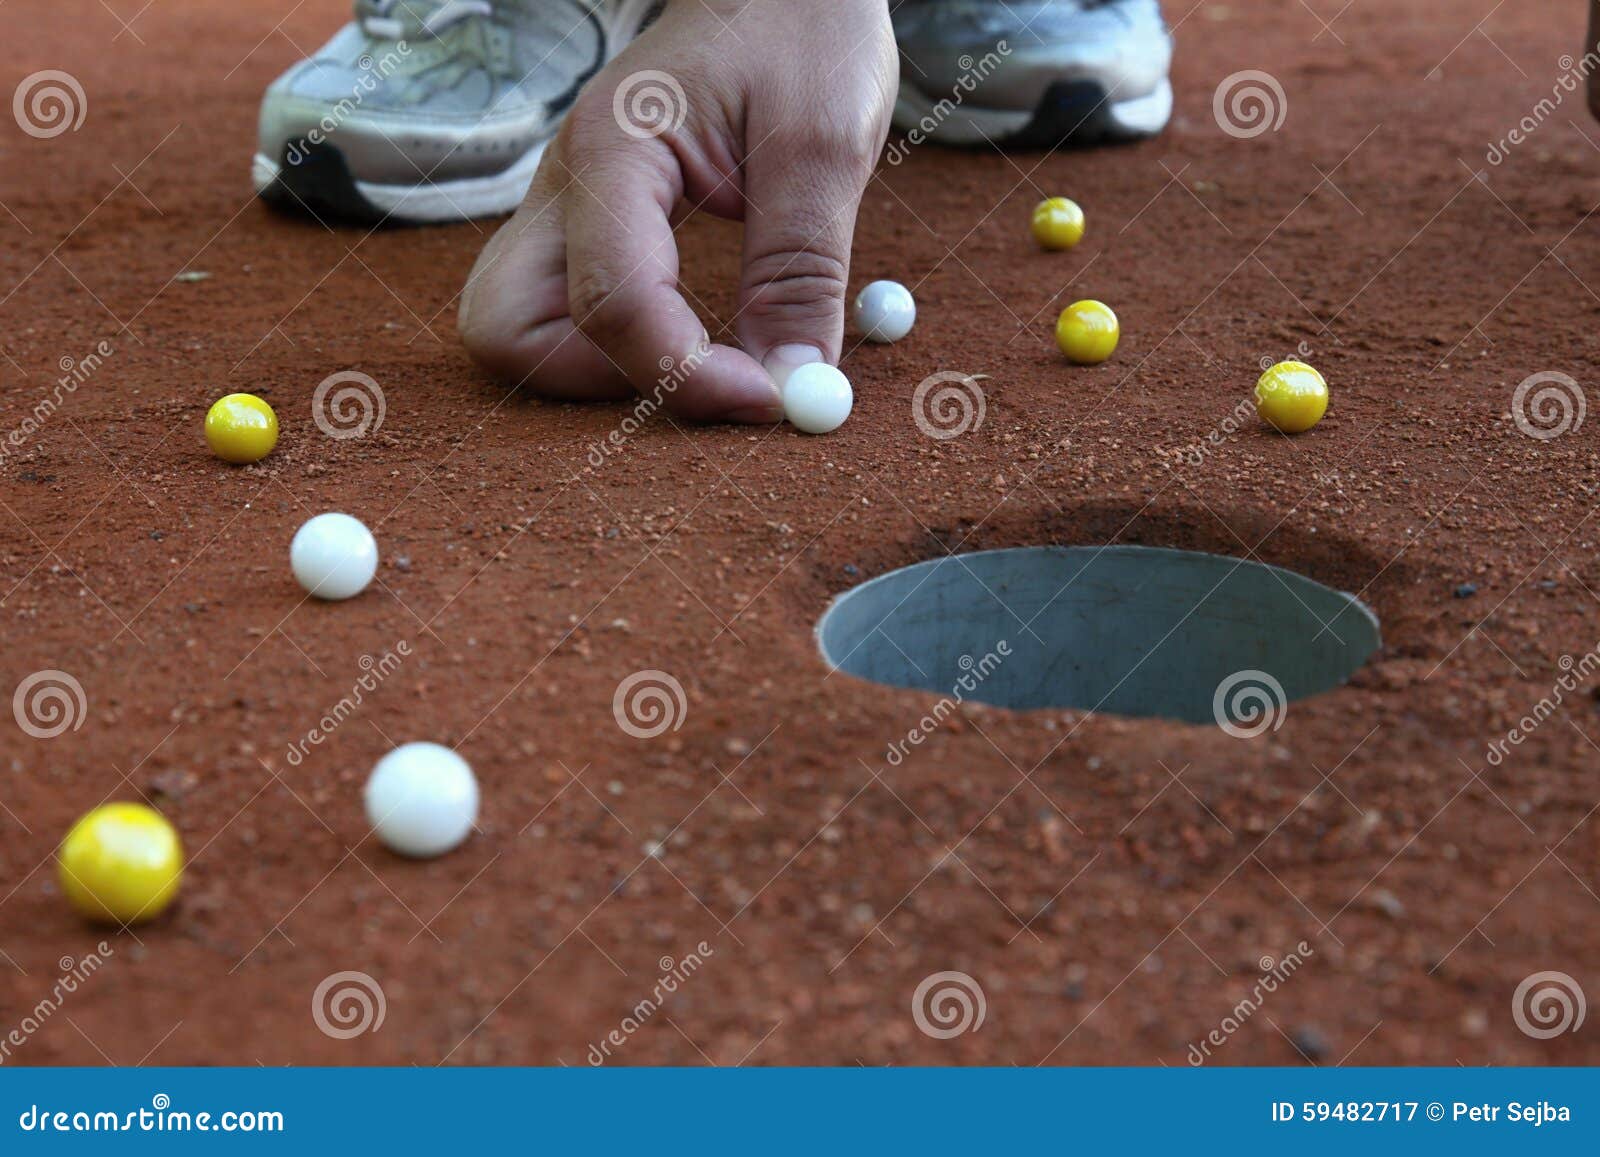 A Marble Player Shooting Marbles To the Hole Stock Image